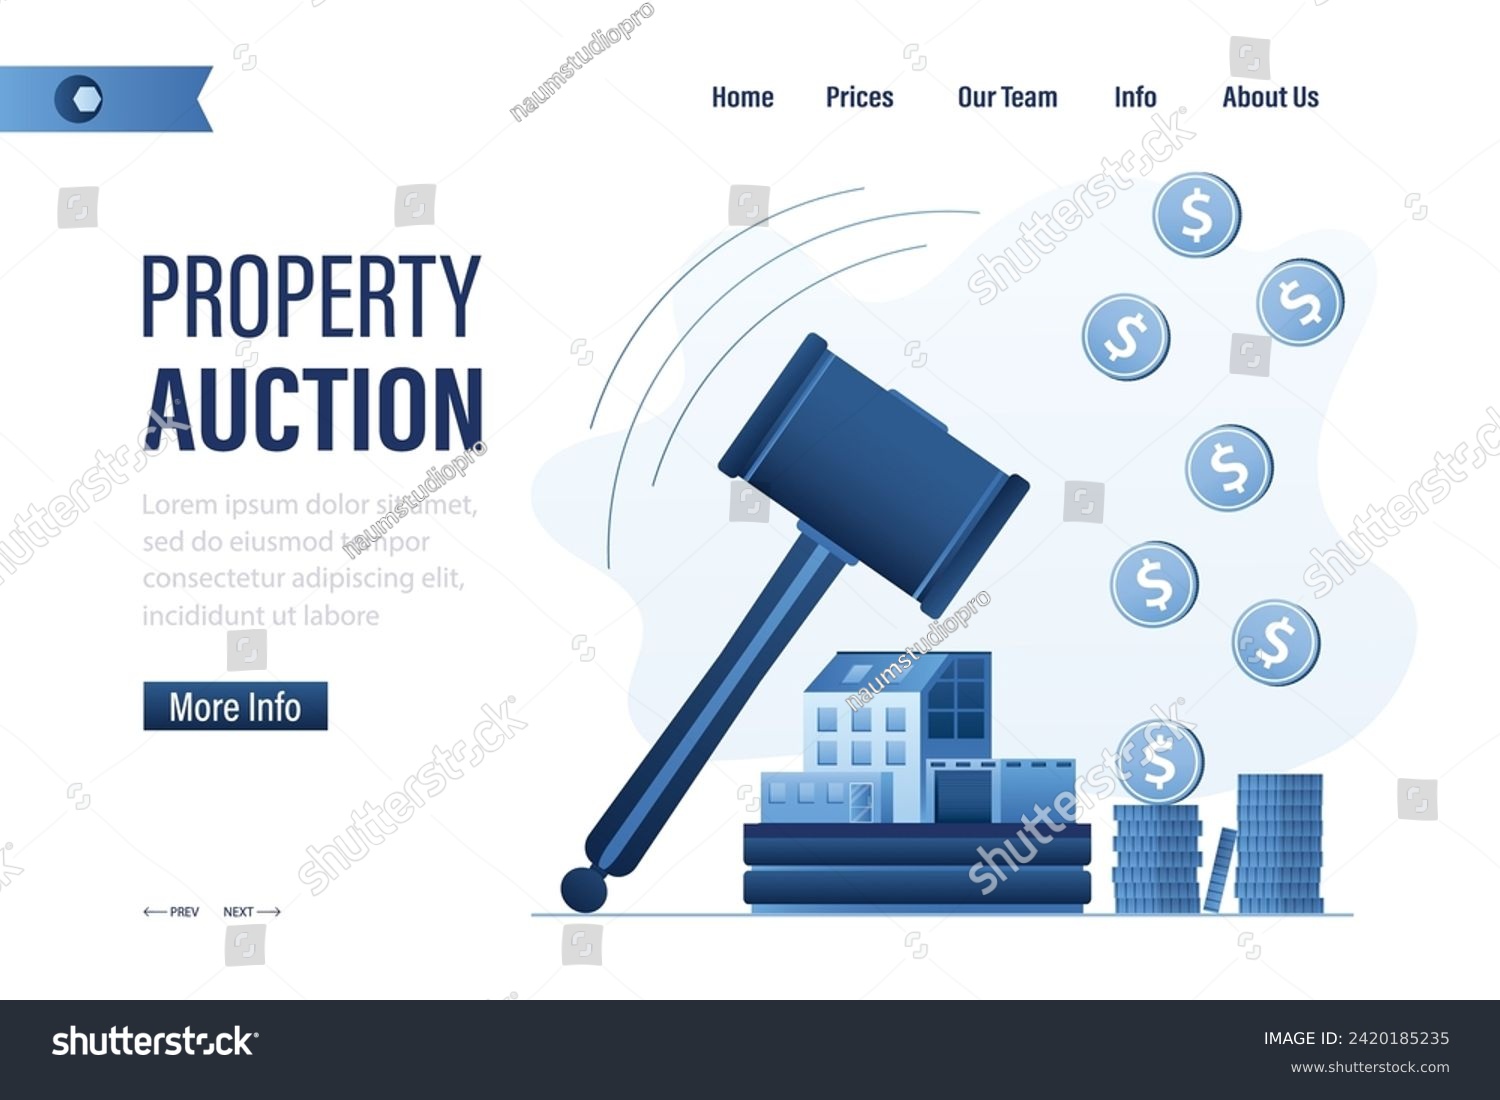 Property auction, landing page template. Modern building, big auction hammer and money. House for sale, profit from real estate deal. Web banner. Design in trendy blue colors. Flat vector illustration #2420185235